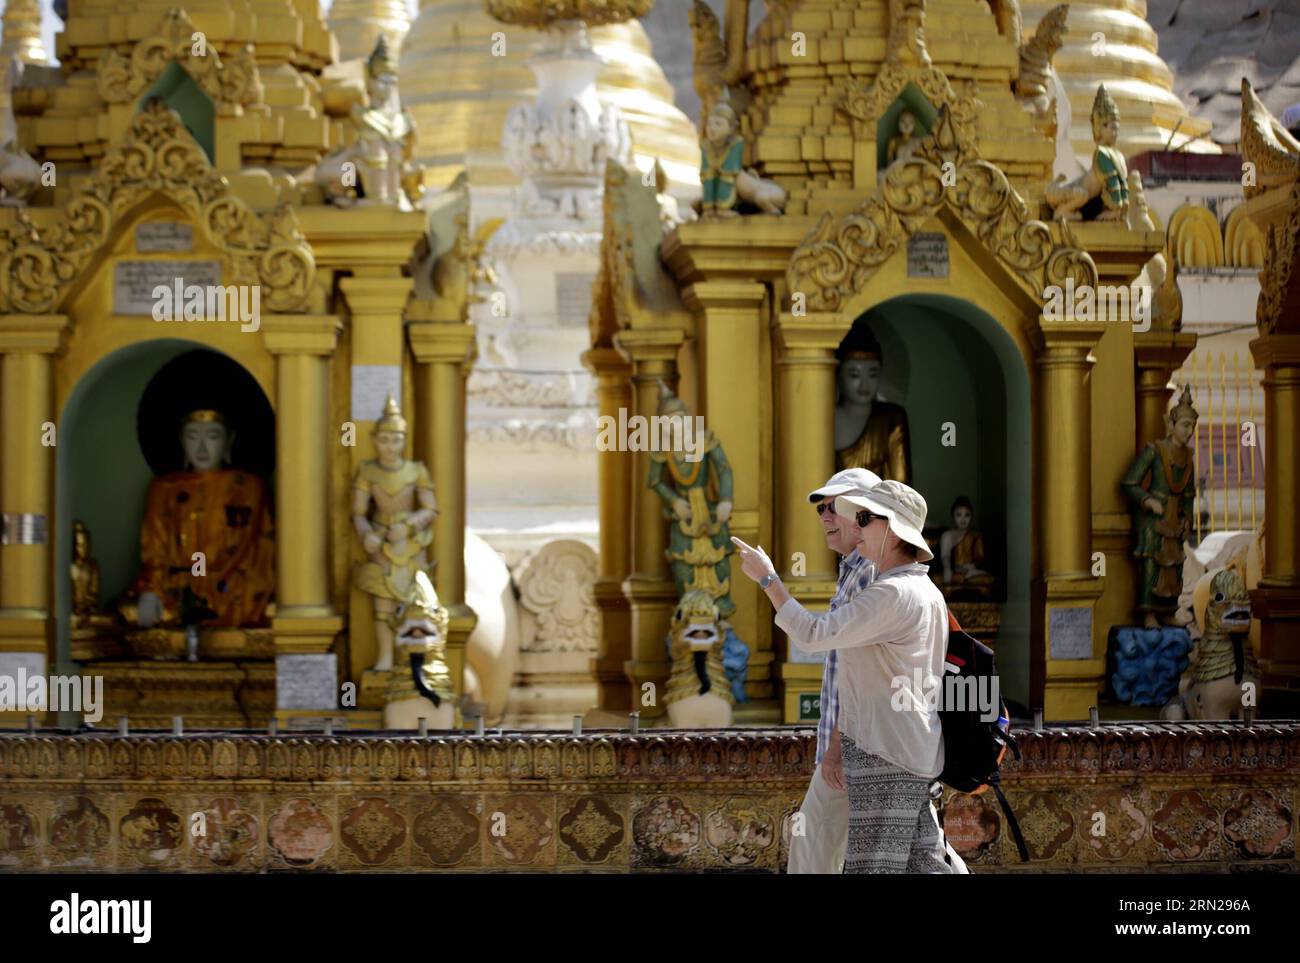 YANGON, Feb. 17, 2015 -- Tourists visit the Shwedagon pagoda in Yangon, Myanmar, Feb. 17, 2015. Shwedagon Pagoda is a repository of the best of Myanmar s heritages -- architecture, sculpture and arts. It consists of hundreds of colorful temples, stupas and statues that reflect architectural styles spanning almost 2,500 years. ) MYANMAR-YANGON-SHWEDAGON PAGODA UxAung PUBLICATIONxNOTxINxCHN   Yangon Feb 17 2015 tourists Visit The Shwedagon Pagoda in Yangon Myanmar Feb 17 2015 Shwedagon Pagoda IS a repository of The Best of Myanmar S heritage Architecture Sculpture and Arts IT consists of hundred Stock Photo